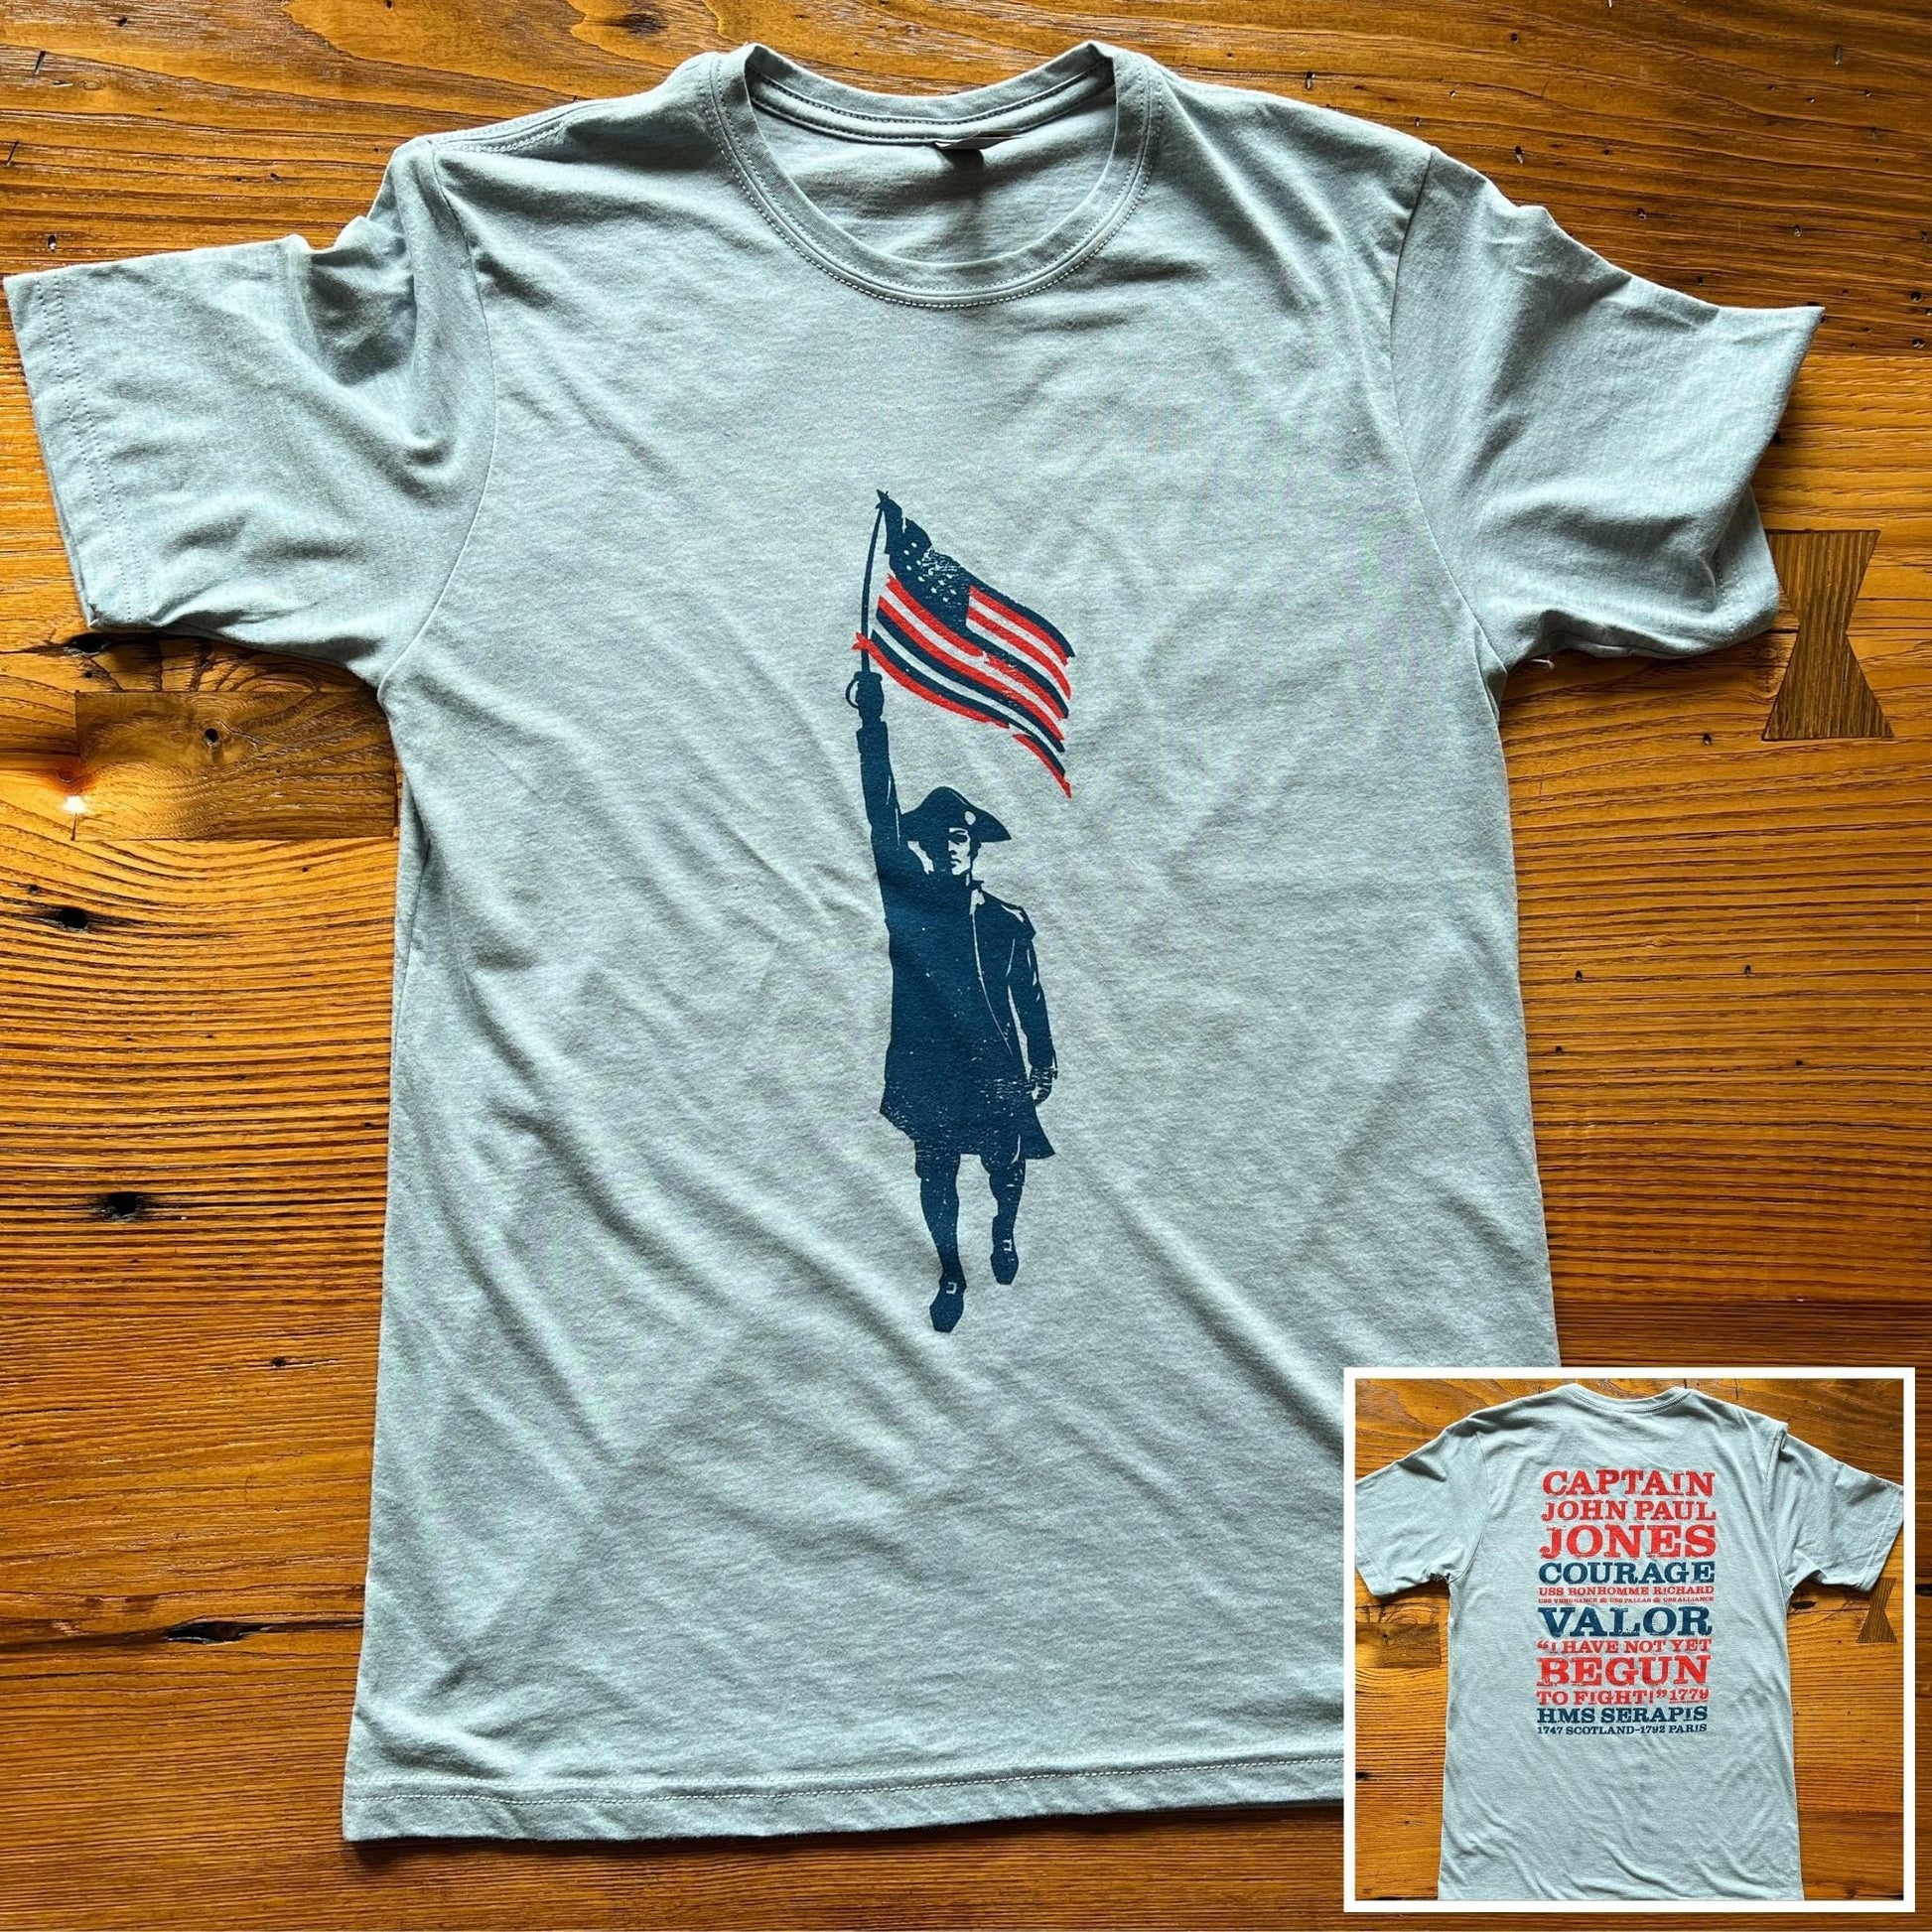 John Paul Jones “I have not yet begun to fight!” Shirt from the History List Store